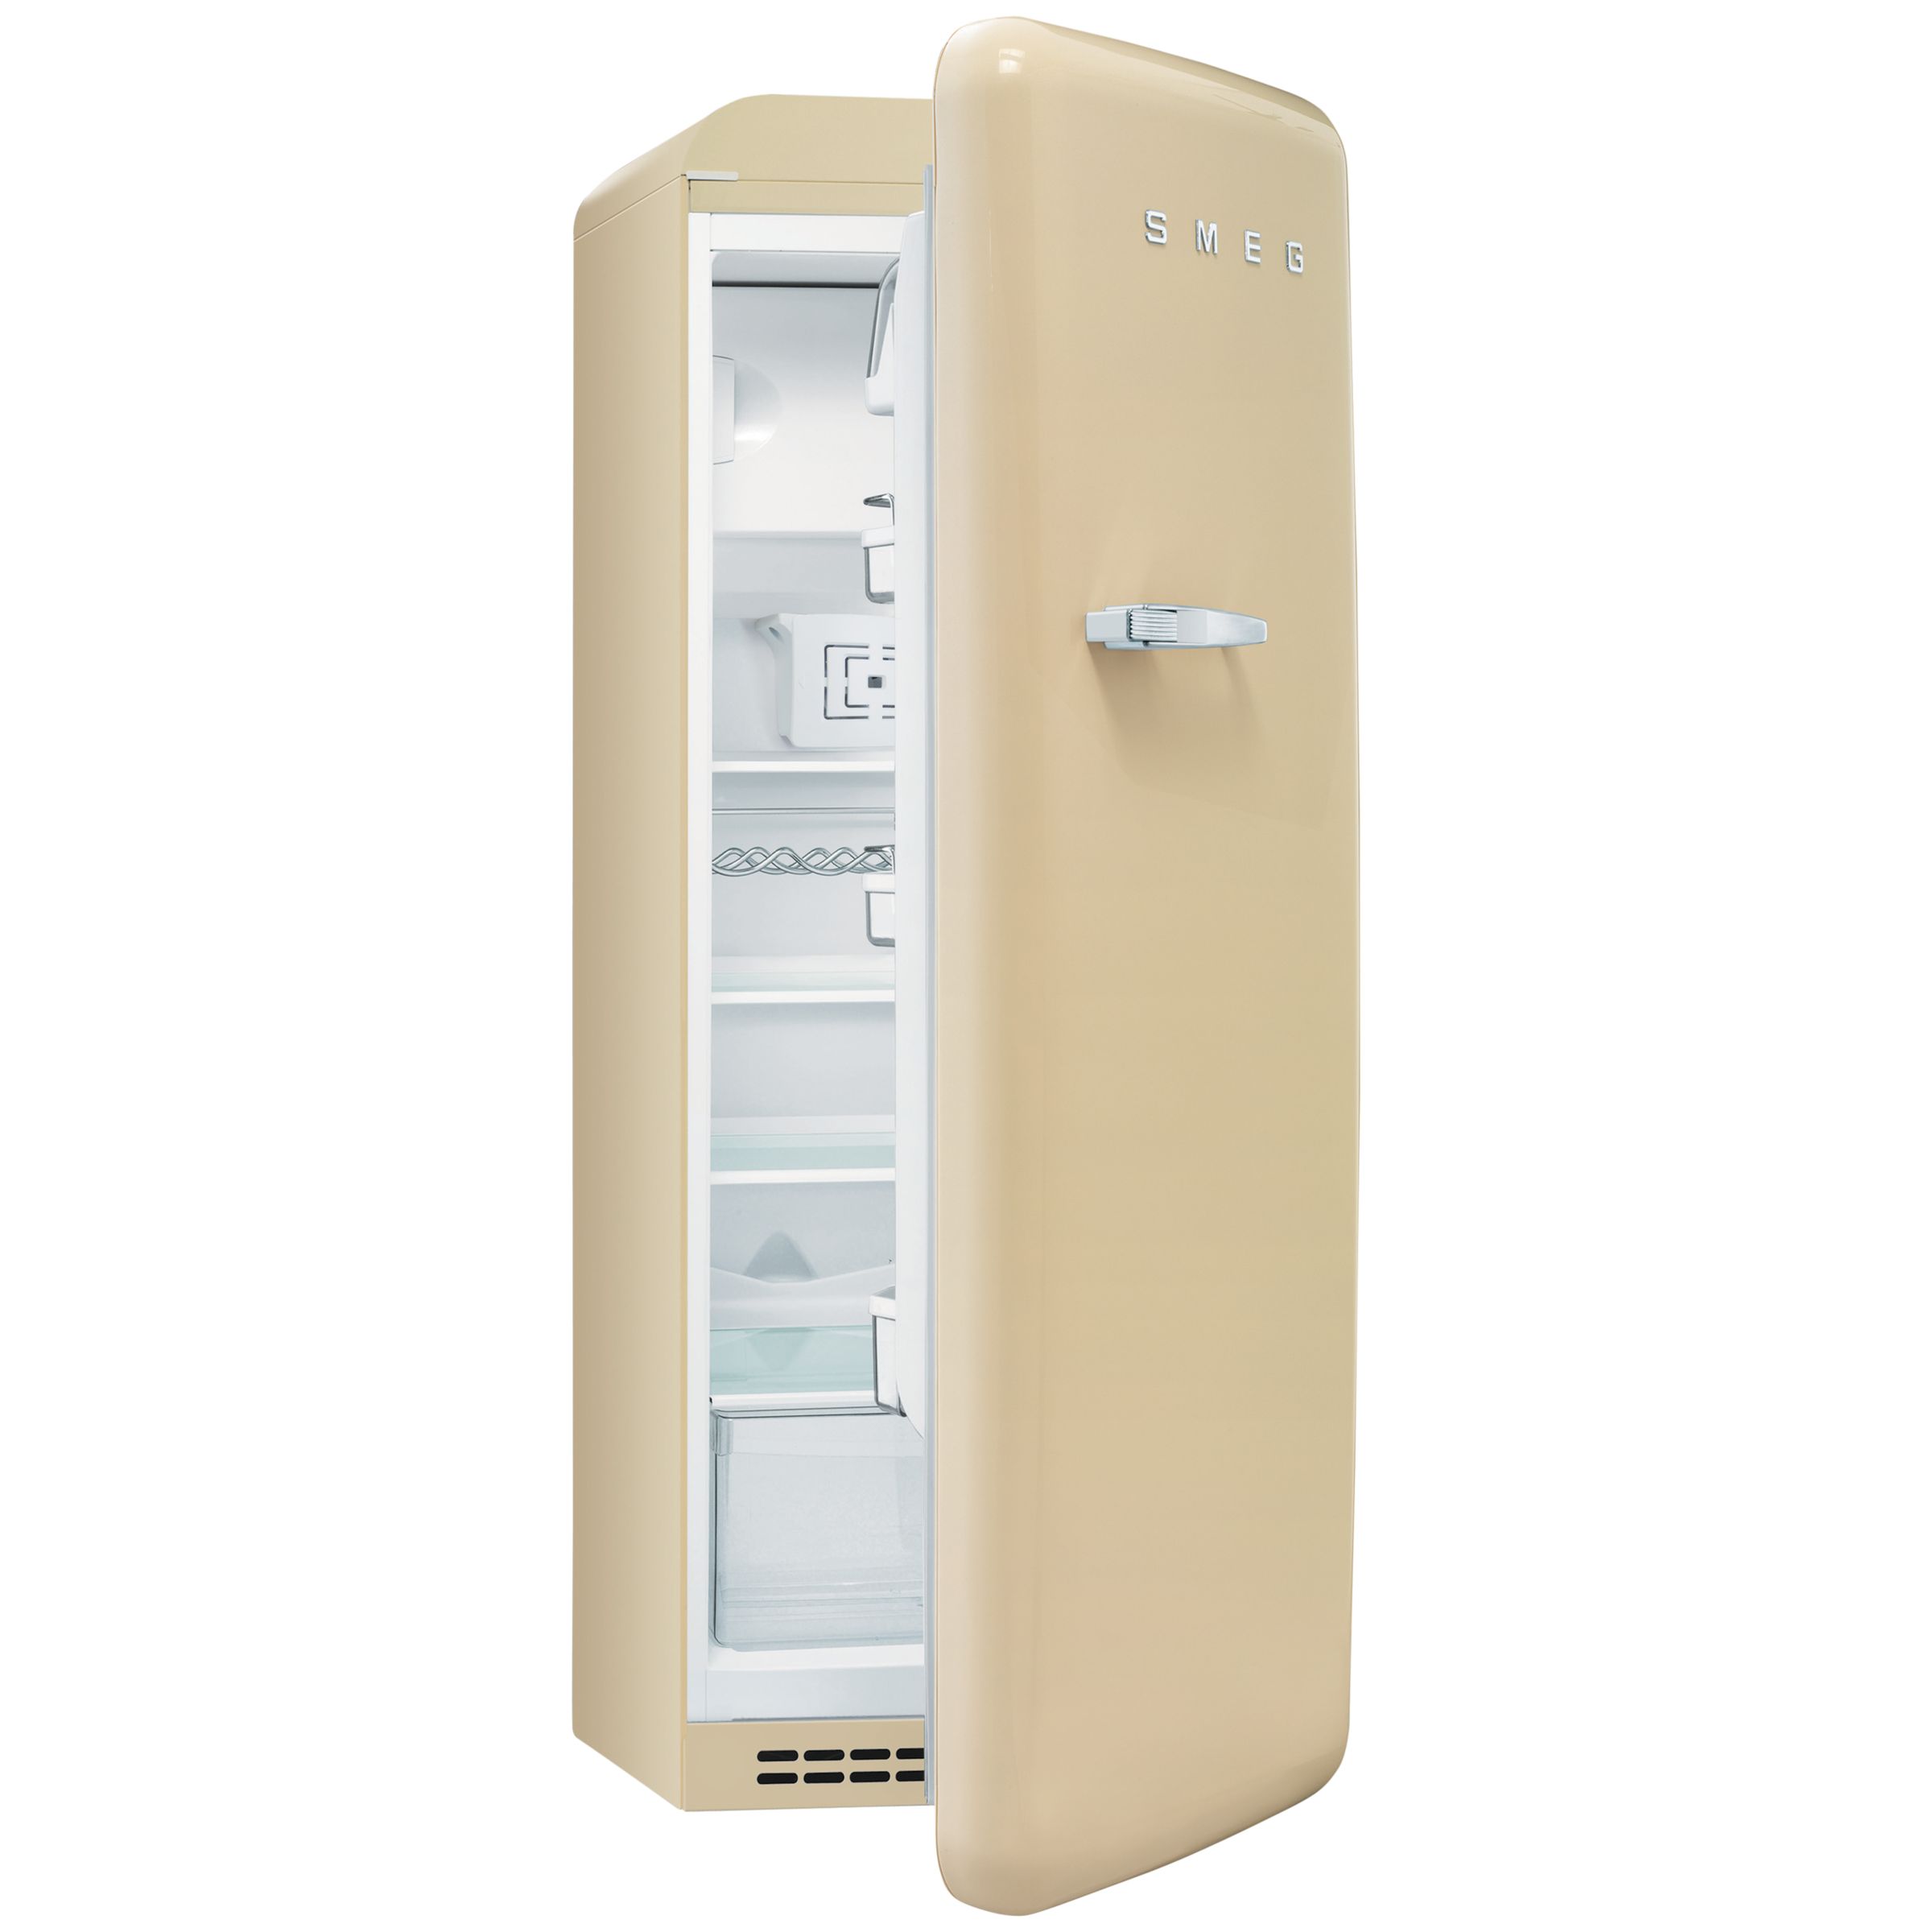  Freezer Compartment, A++ Energy Rating, 60cm Wide, Cream  John Lewis